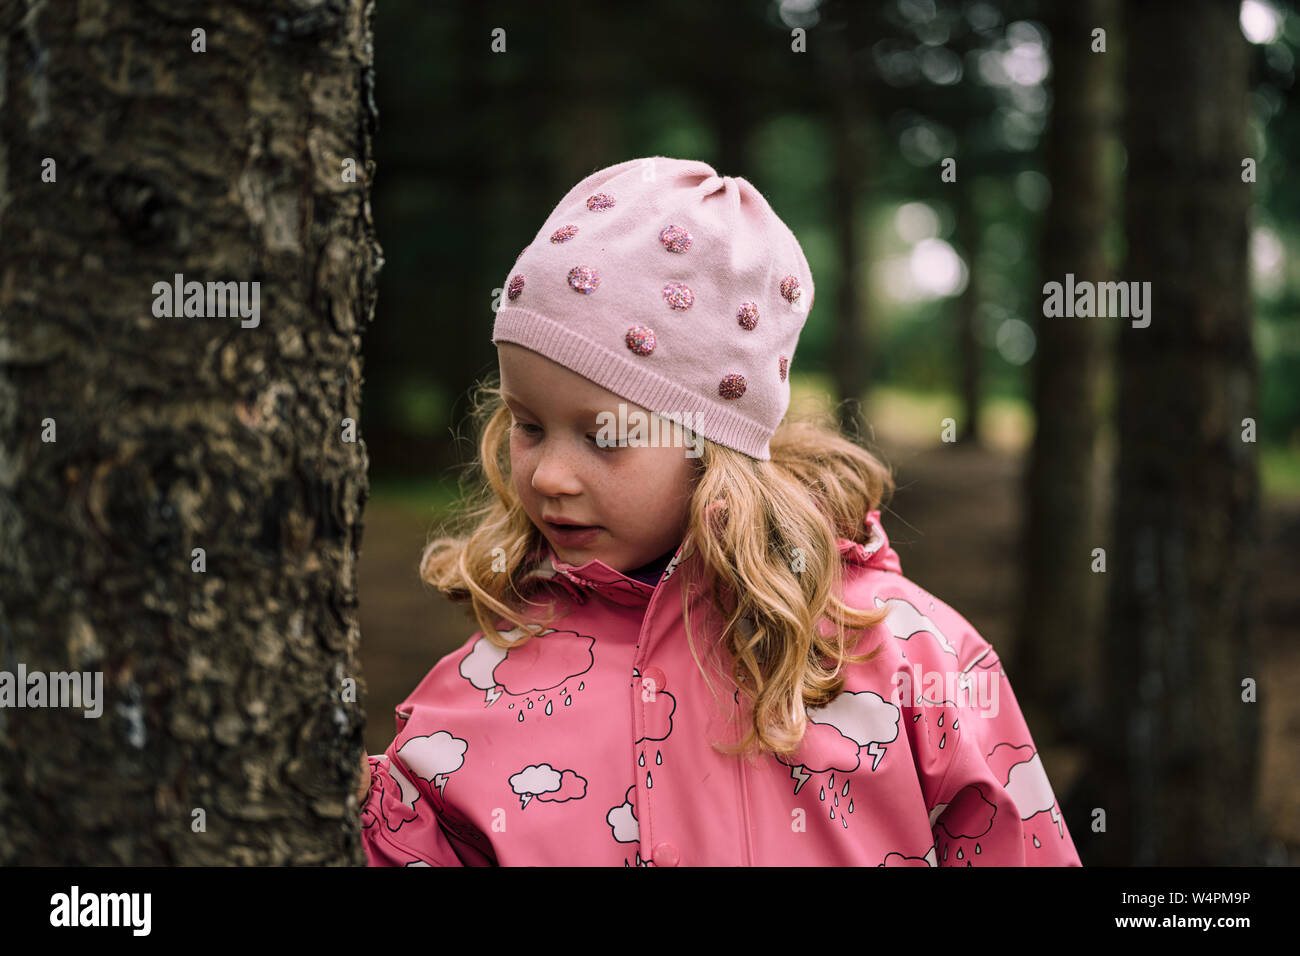 Blonde haired girl in pink raincoat and hat standing next to tree in Reykjavik, Iceland forest Stock Photo